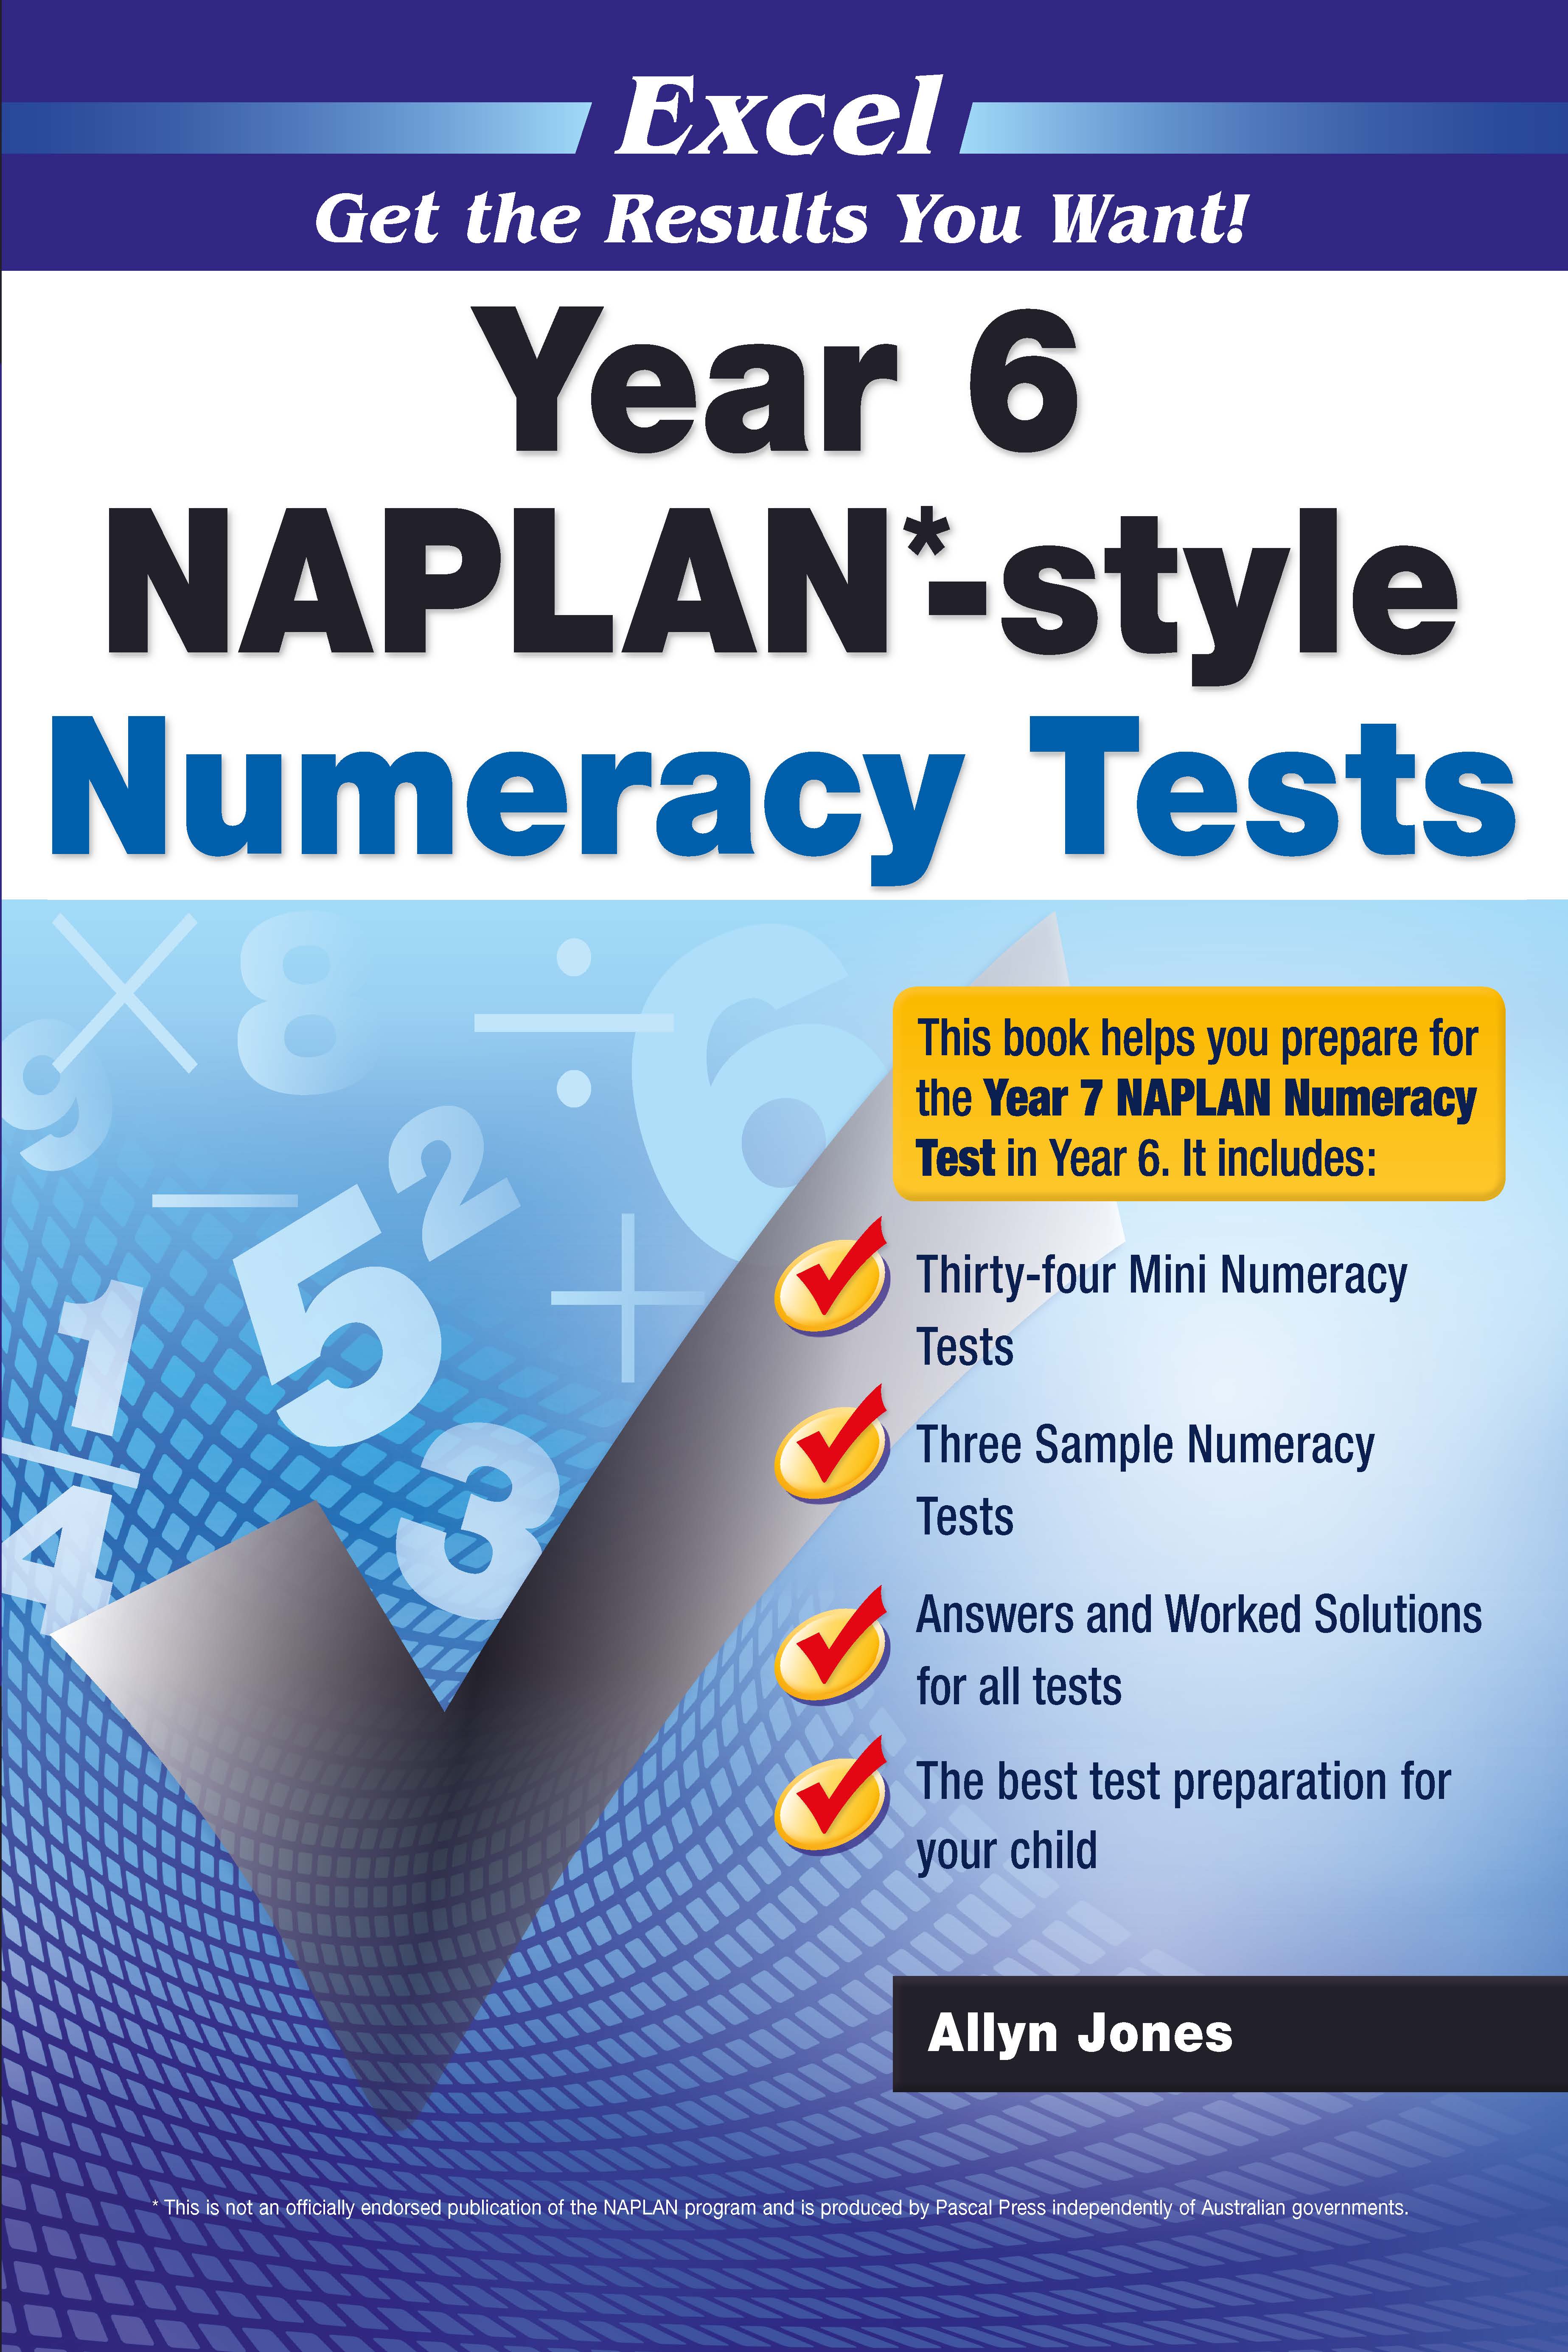 Picture of Excel NAPLAN*-style Numeracy Tests Year 6